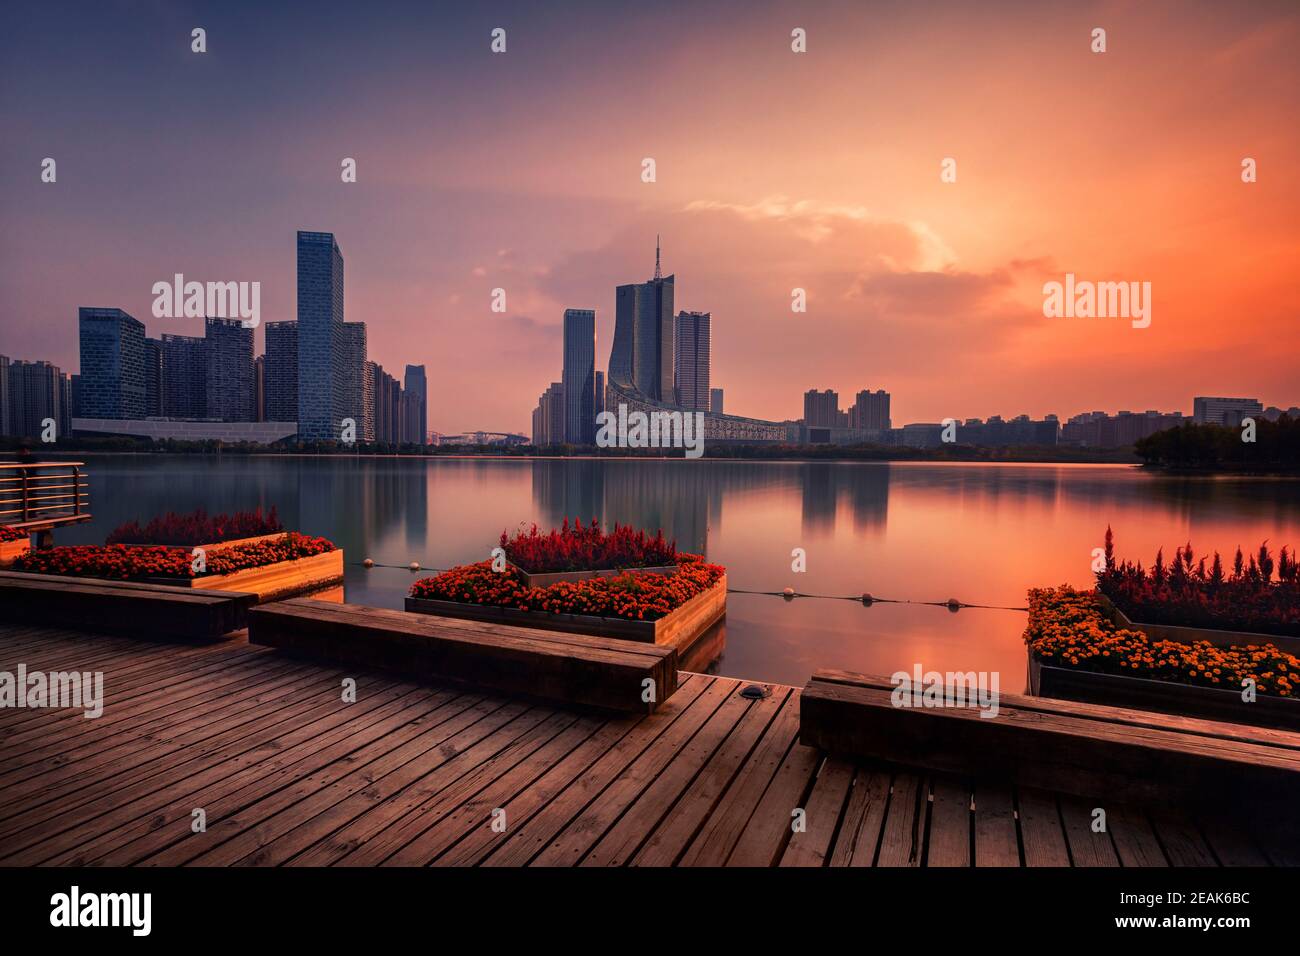 sunset over Swan Lake financial business district, Hefei city, China Stock Photo